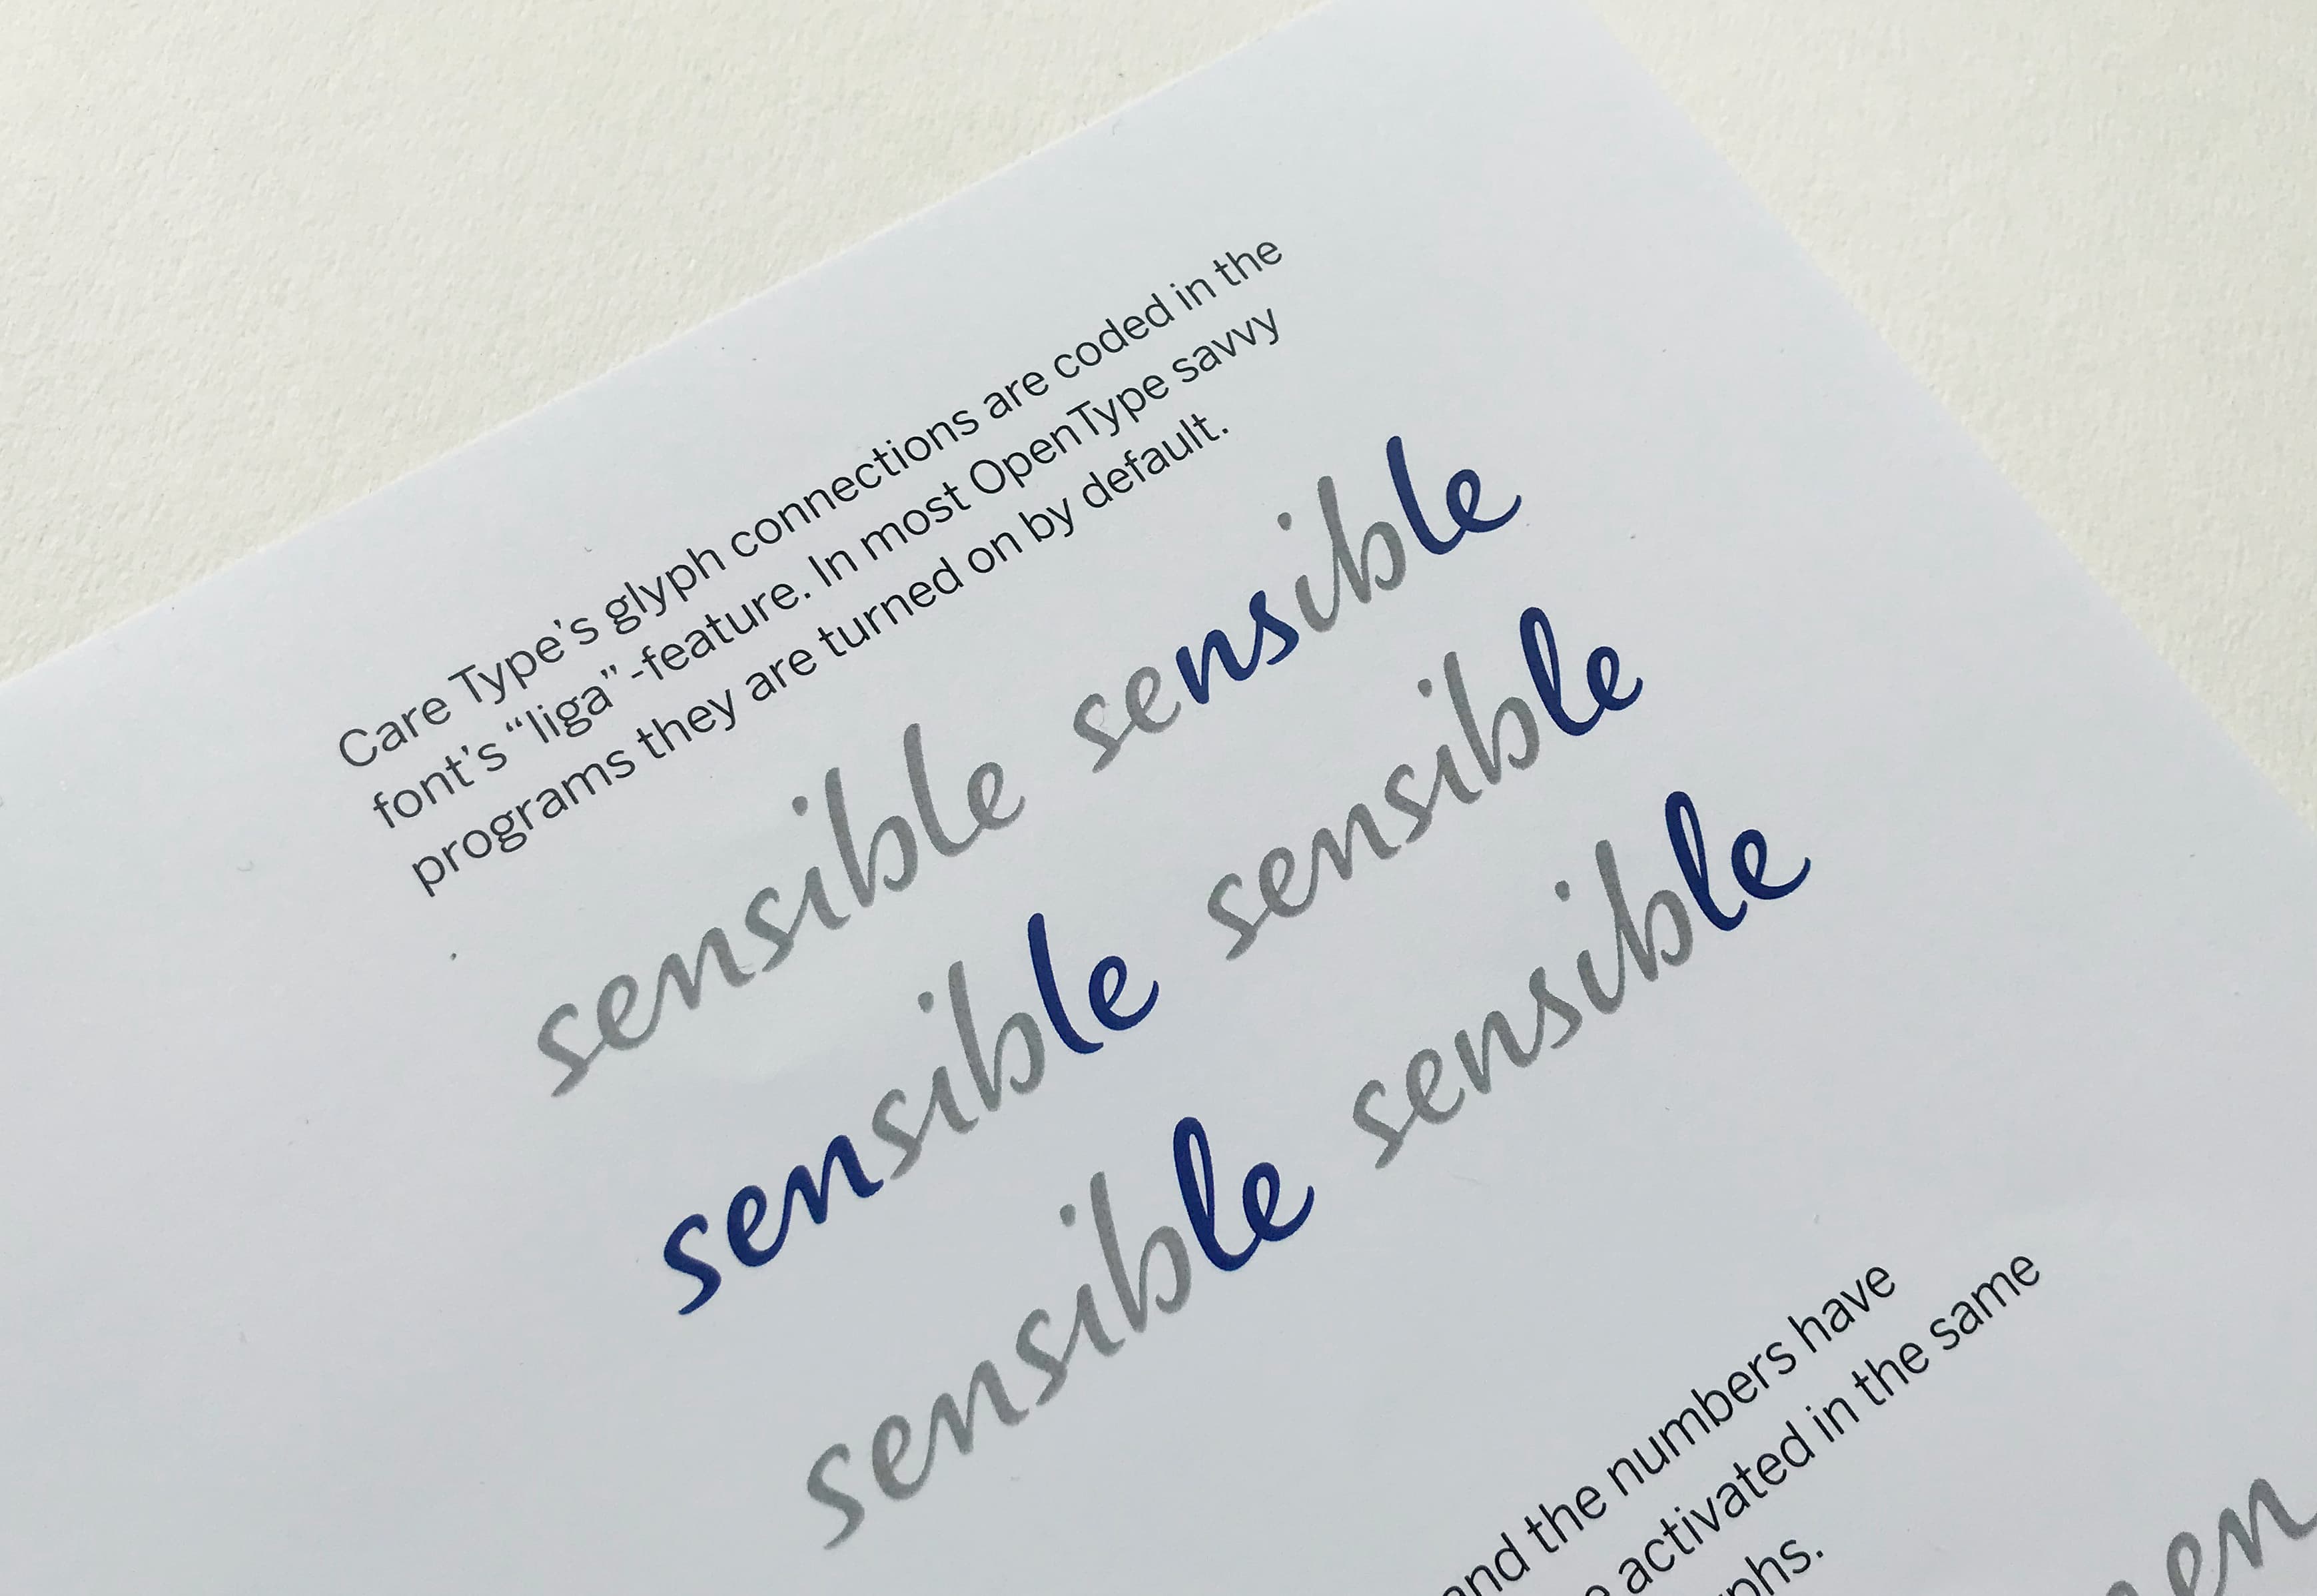 sample of Nivea Care Type font: different versions of the word sensible